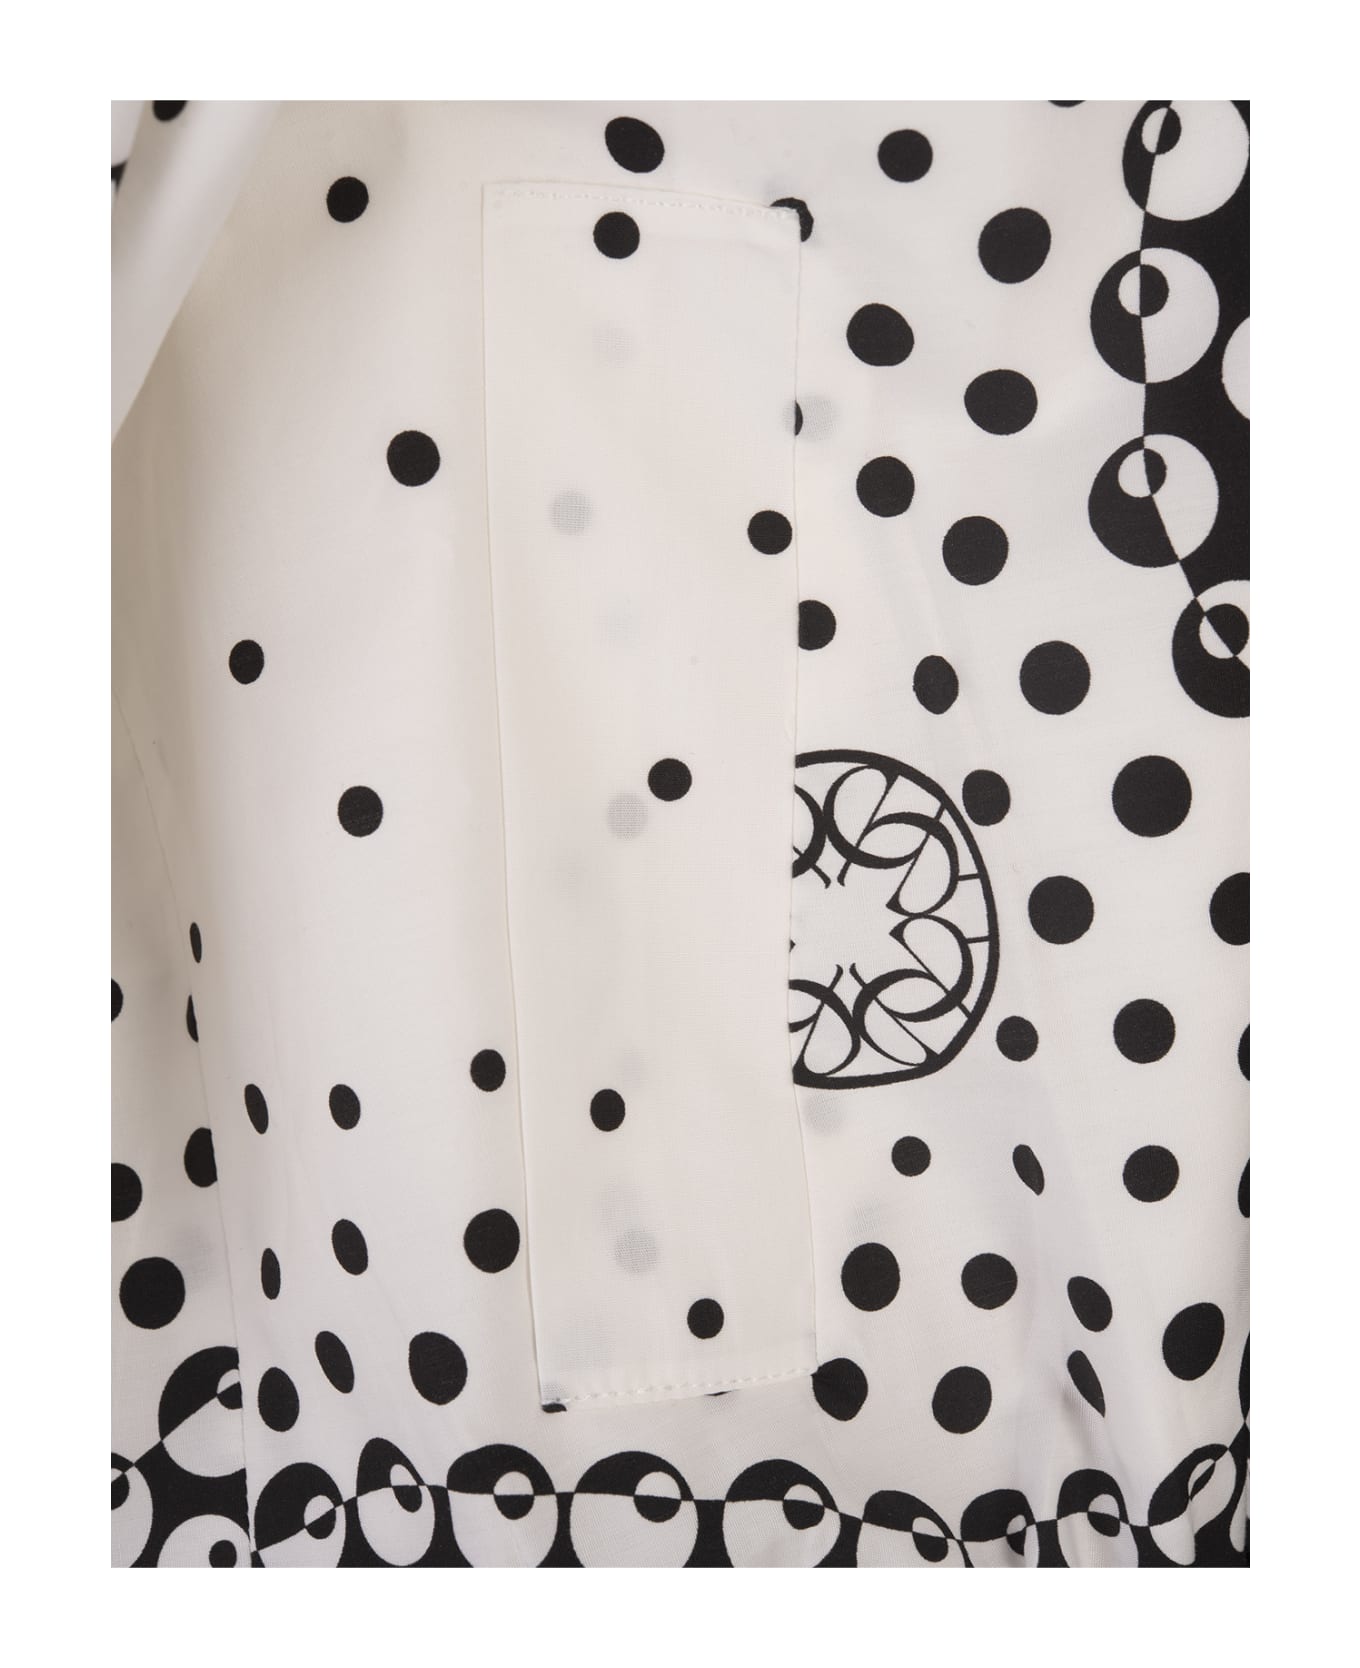 Elie Saab Moon Printed Cotton Bomber Jacket In White And Black - White